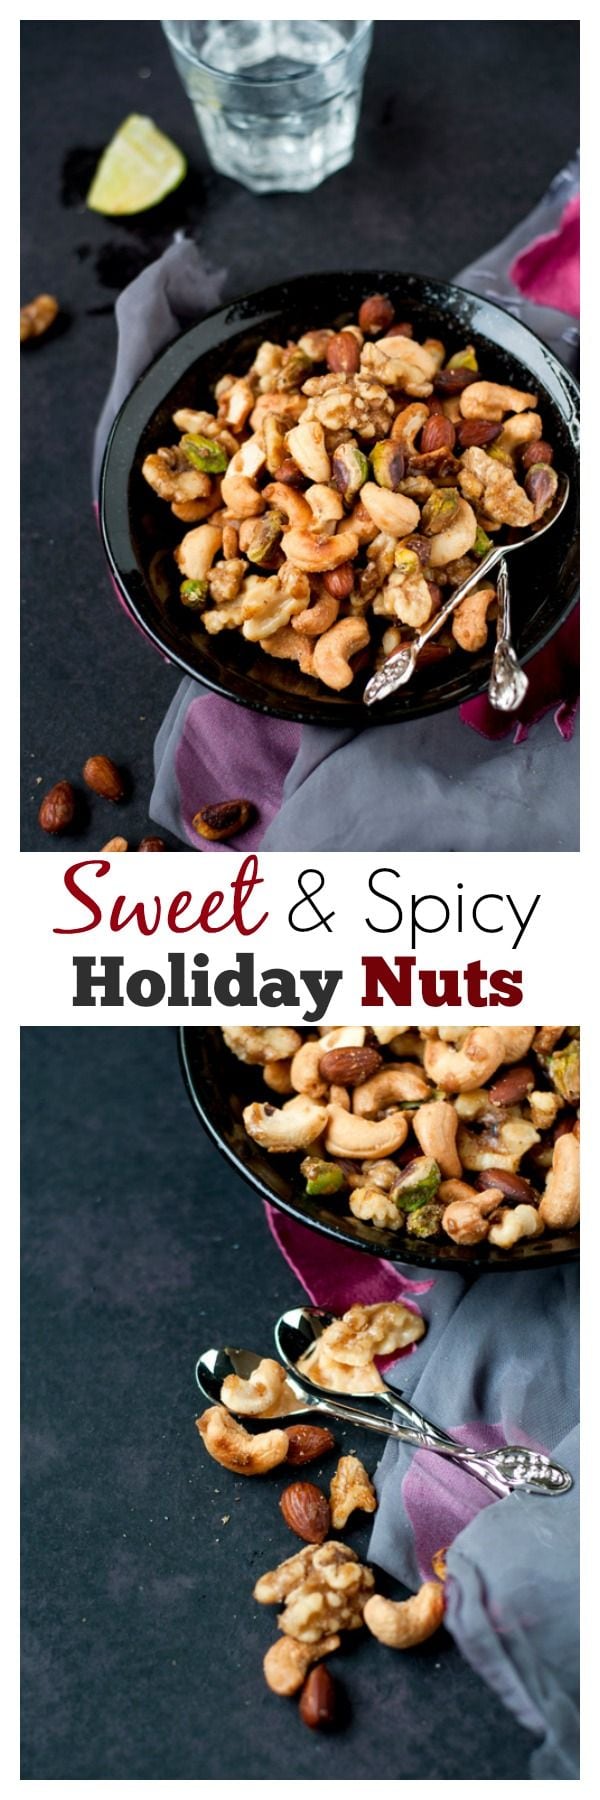 Sweet and Spicy Holiday Nuts - easy and amazing holiday nuts, with some heat. Recipe by @Reem | Simply Reem | rasamalaysia.com